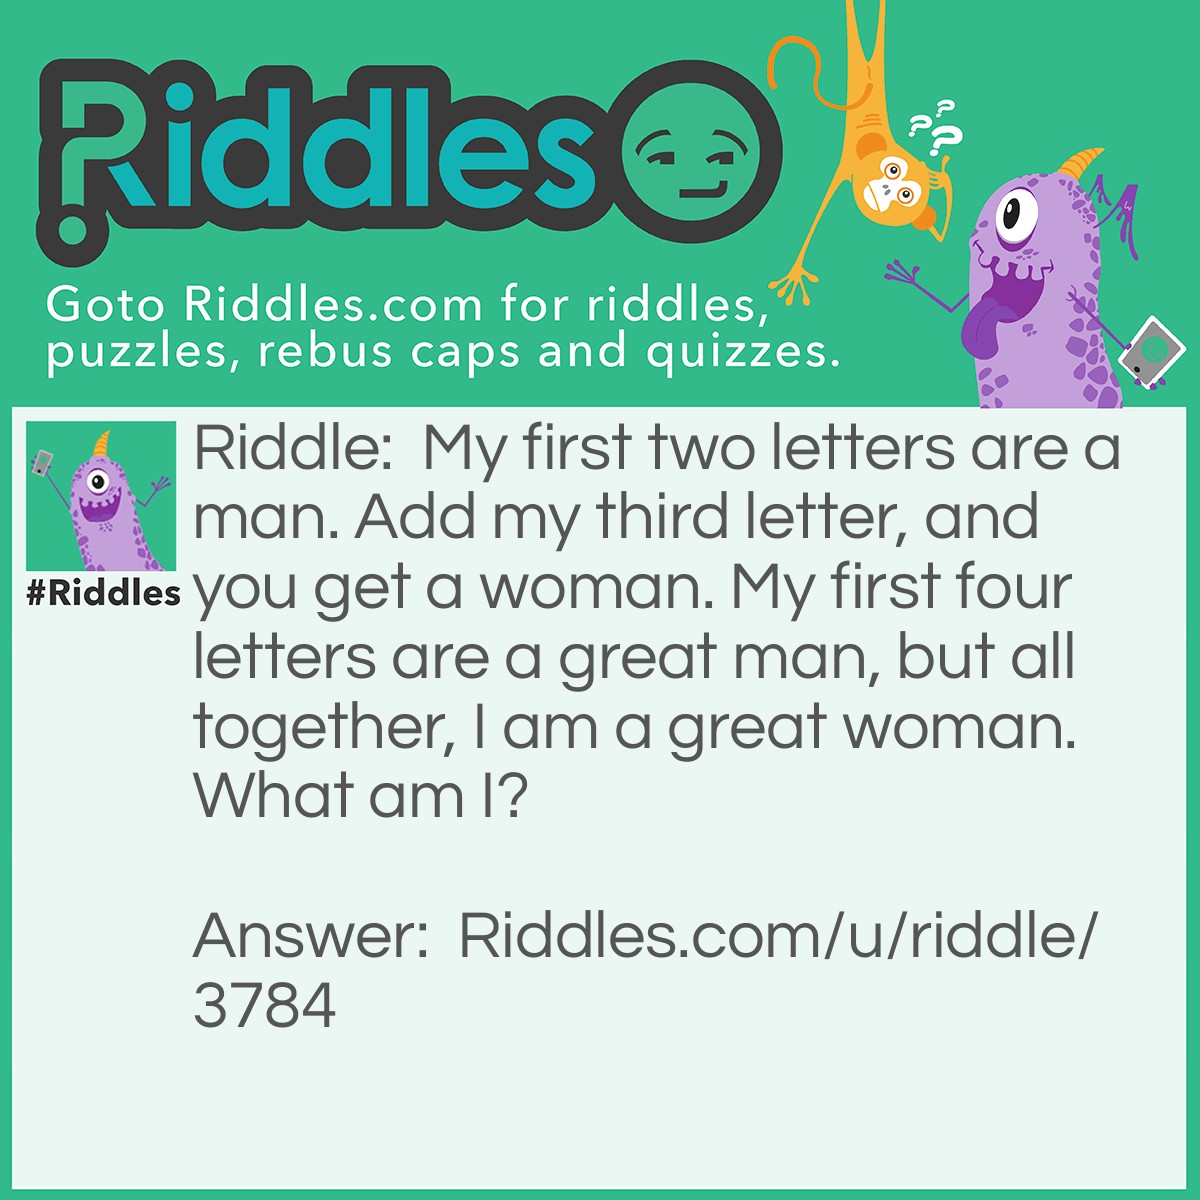 Riddle: My first two letters are a man. Add my third letter, and you get a woman. My first four letters are a great man, but all together, I am a great woman. What am I? Answer: Heroine